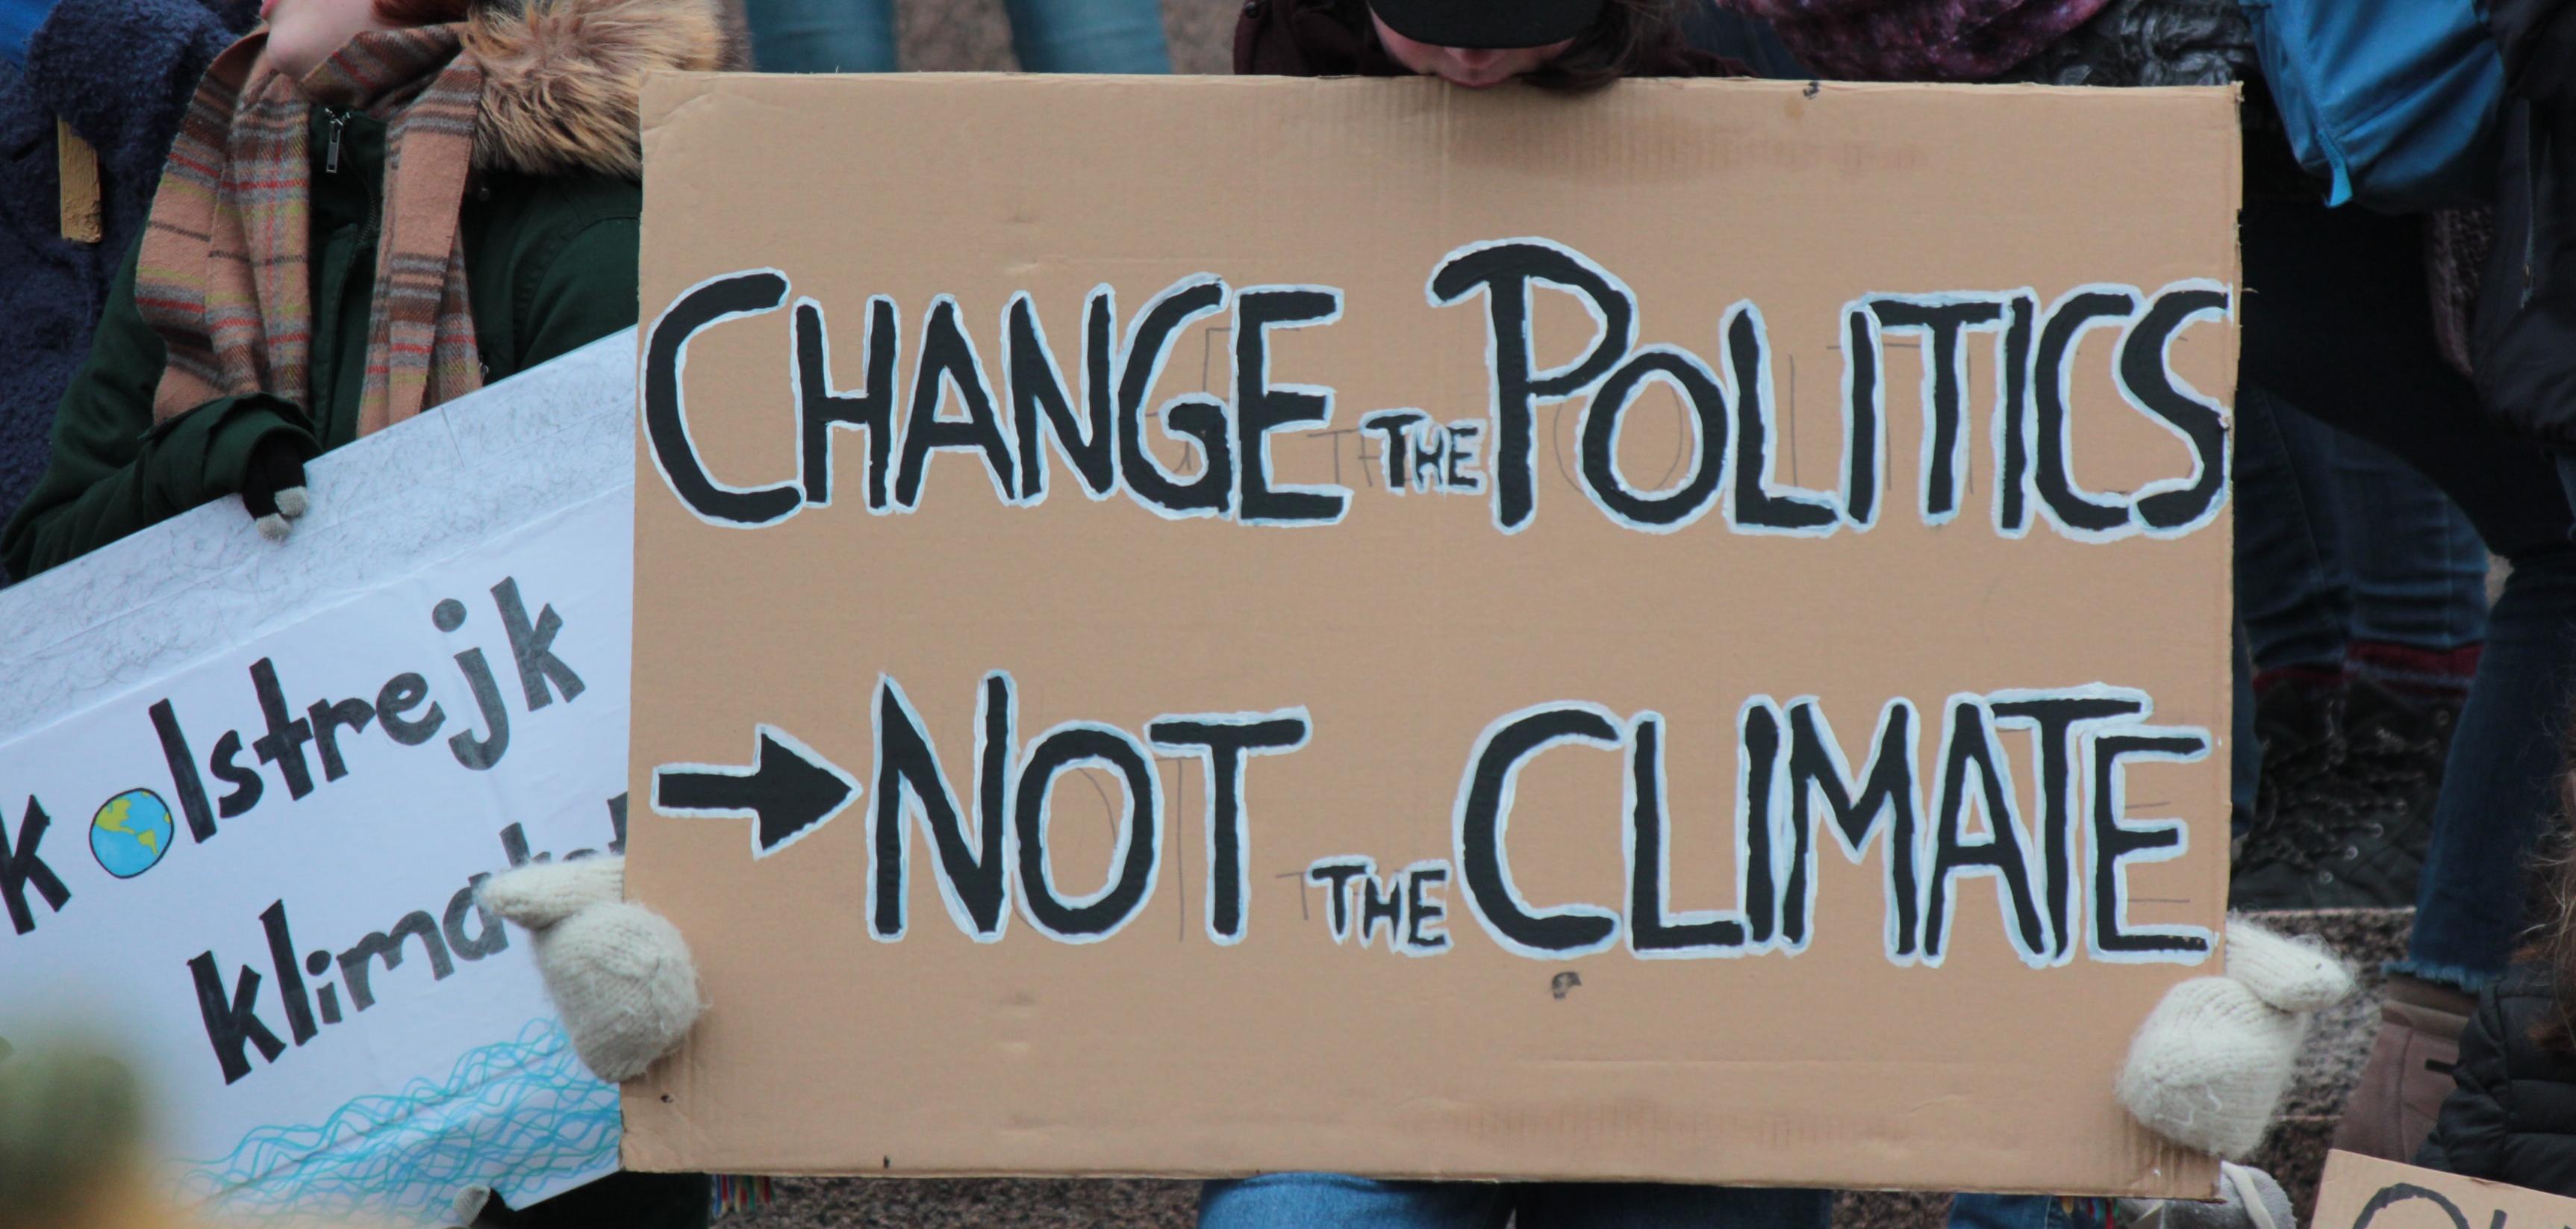 a protester with a sign that says "change the politics not the climate"